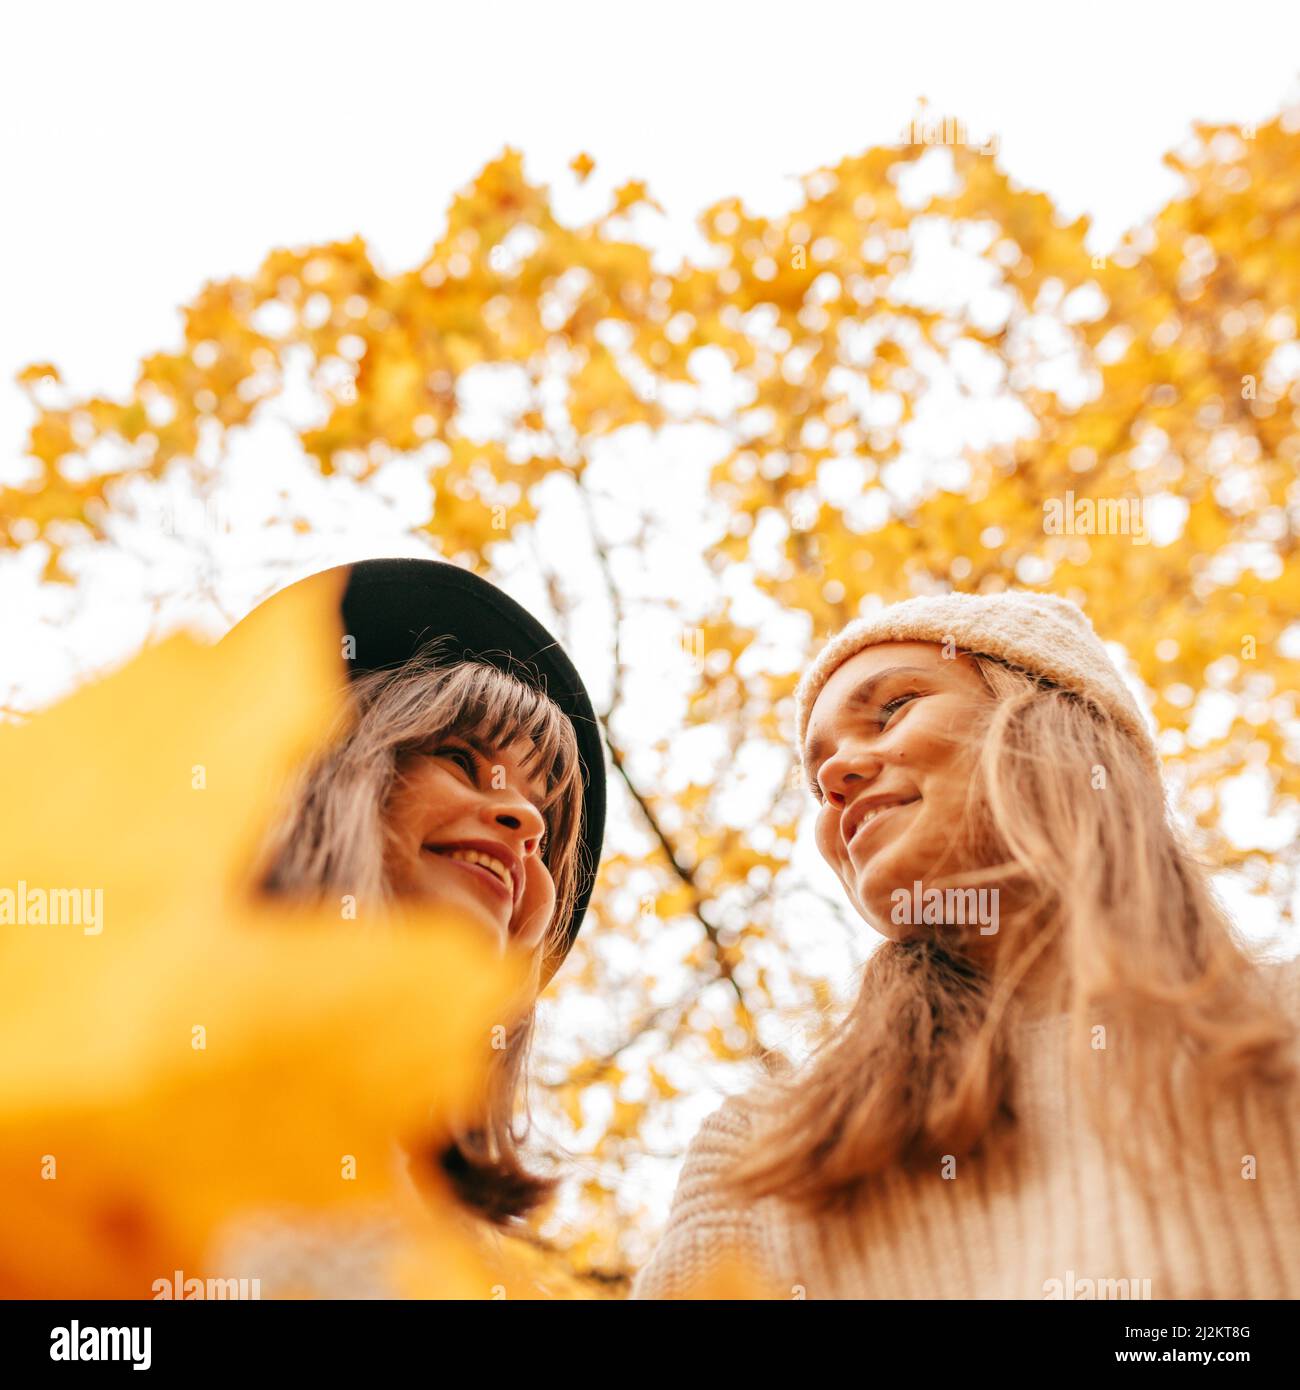 Two happy glad smiling girls, spending time in yellow maple park, weekend activity. Looking each other gently. Low angle Stock Photo